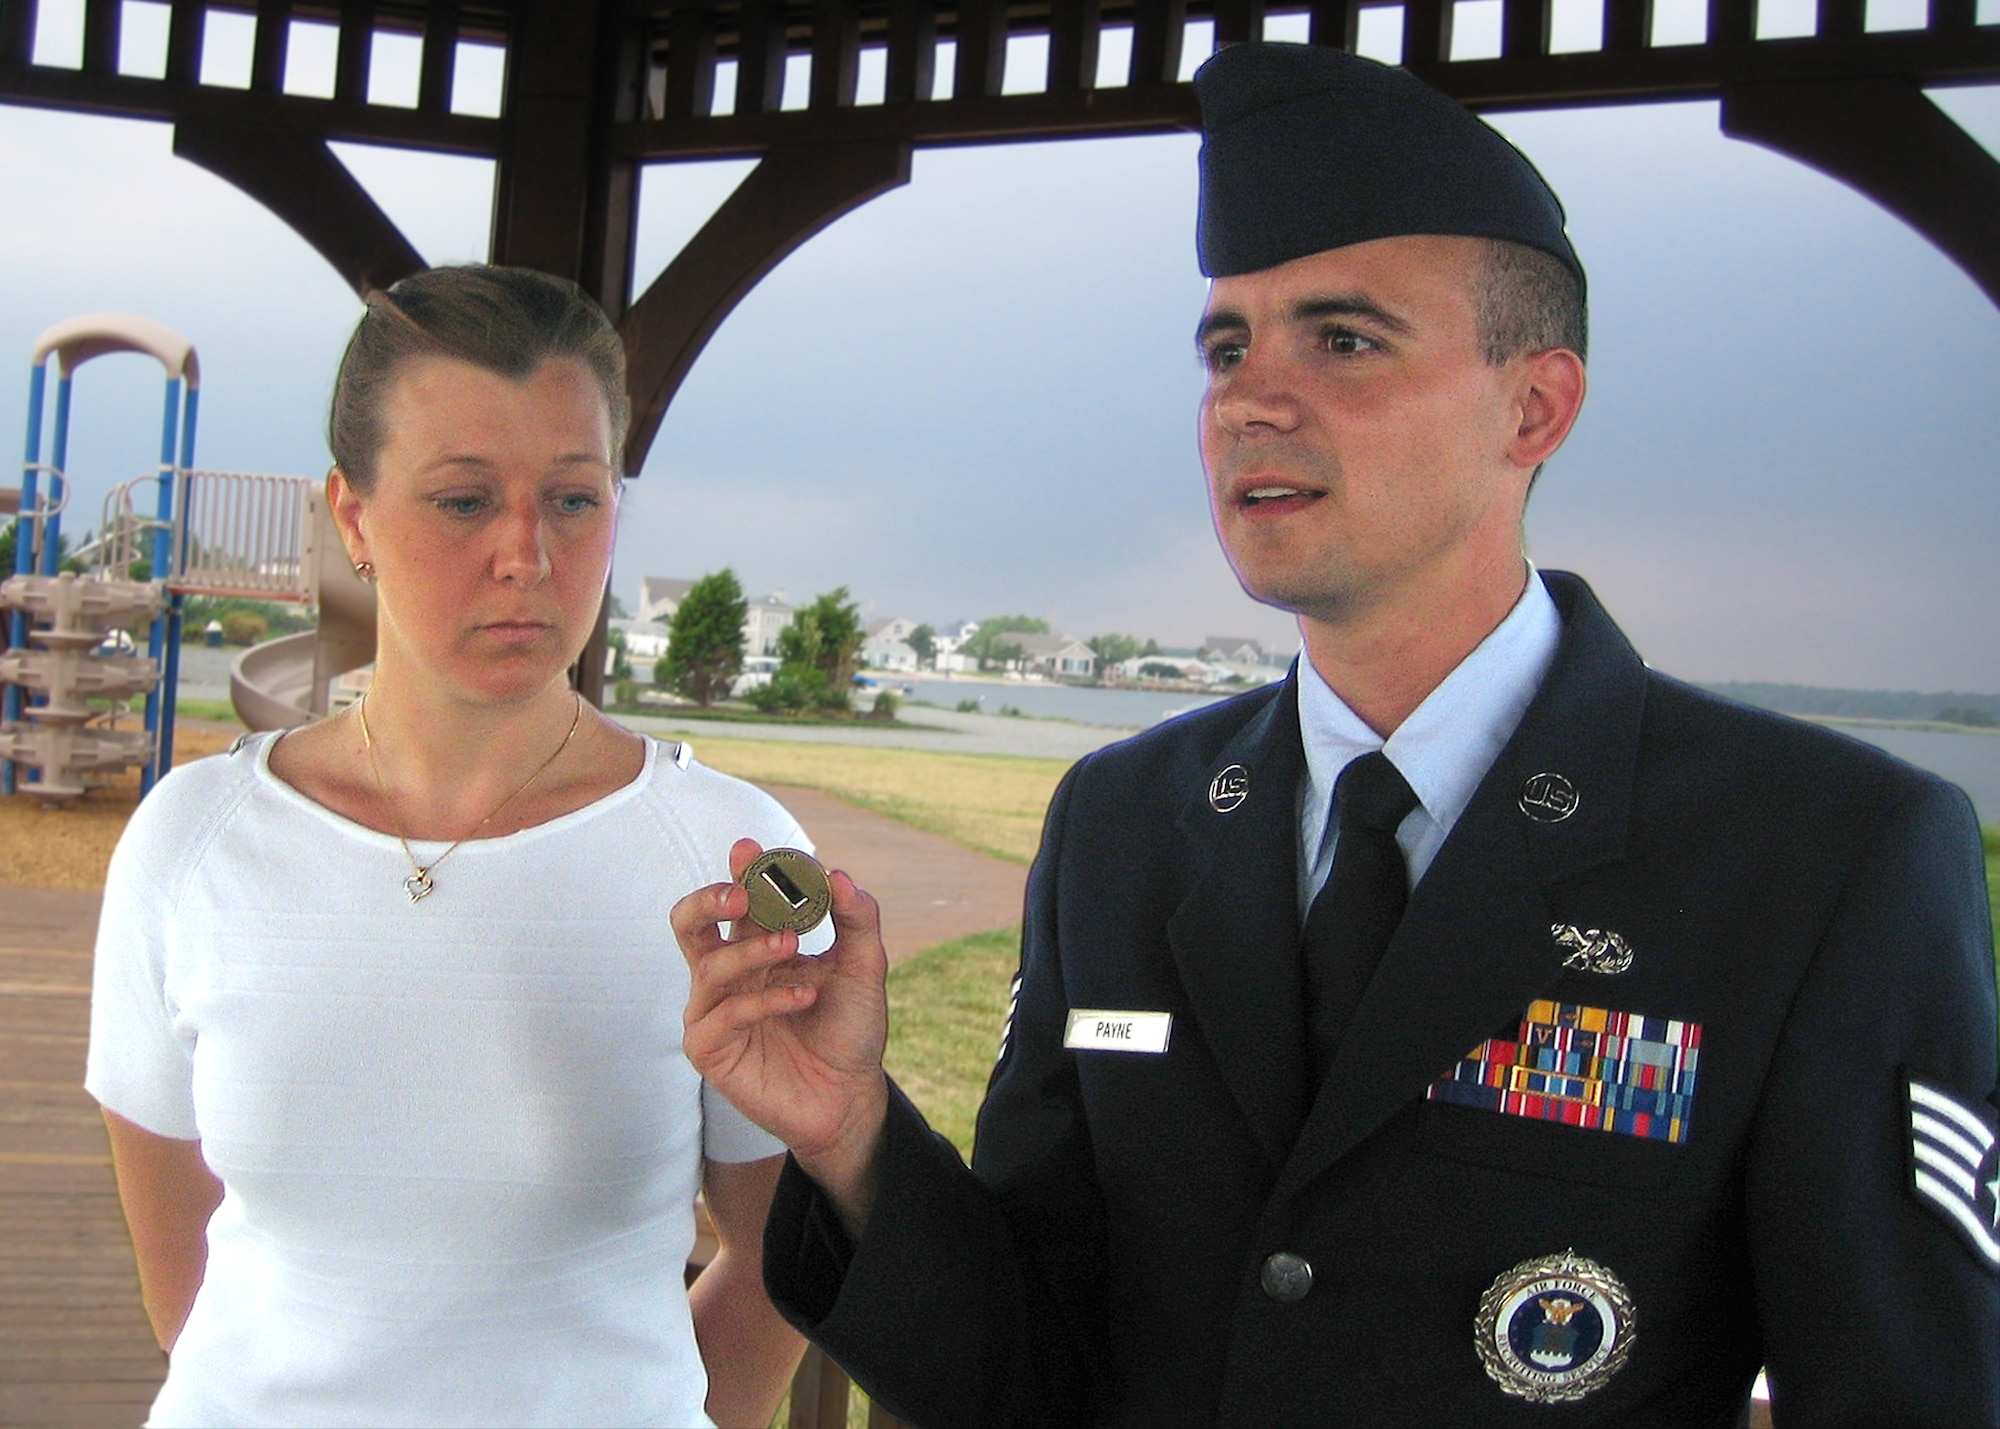 Air Force recruiter Staff Sgt. Robert Payne prepares to coin newly minted 1st Lt. Susan M. Senko, an officer accessions nurse candidate, recently at Forked River, N.J. The Air Force Sergeants Association named the Bala Cynwyd, Pa., recruiter as its 2007 Pitsenbarger Award recipient. The award recognizes Air Force enlisted members who perform heroic acts that result in saving a life or preventing serious injury. (Courtesy photo illustration)